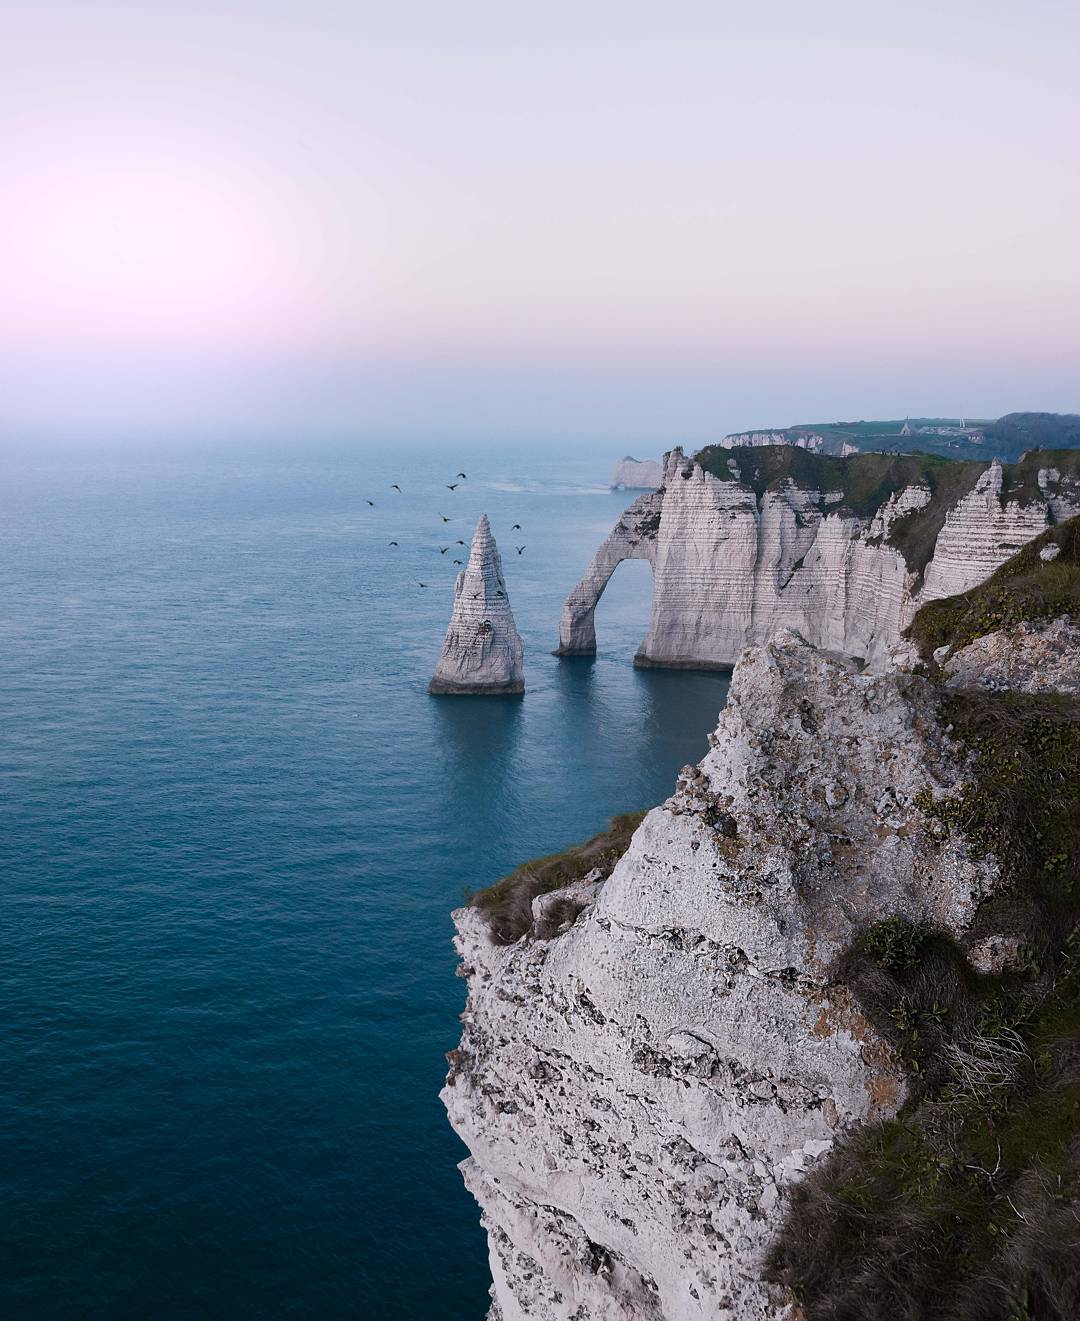 etretat is among the famous natural landmarks in france